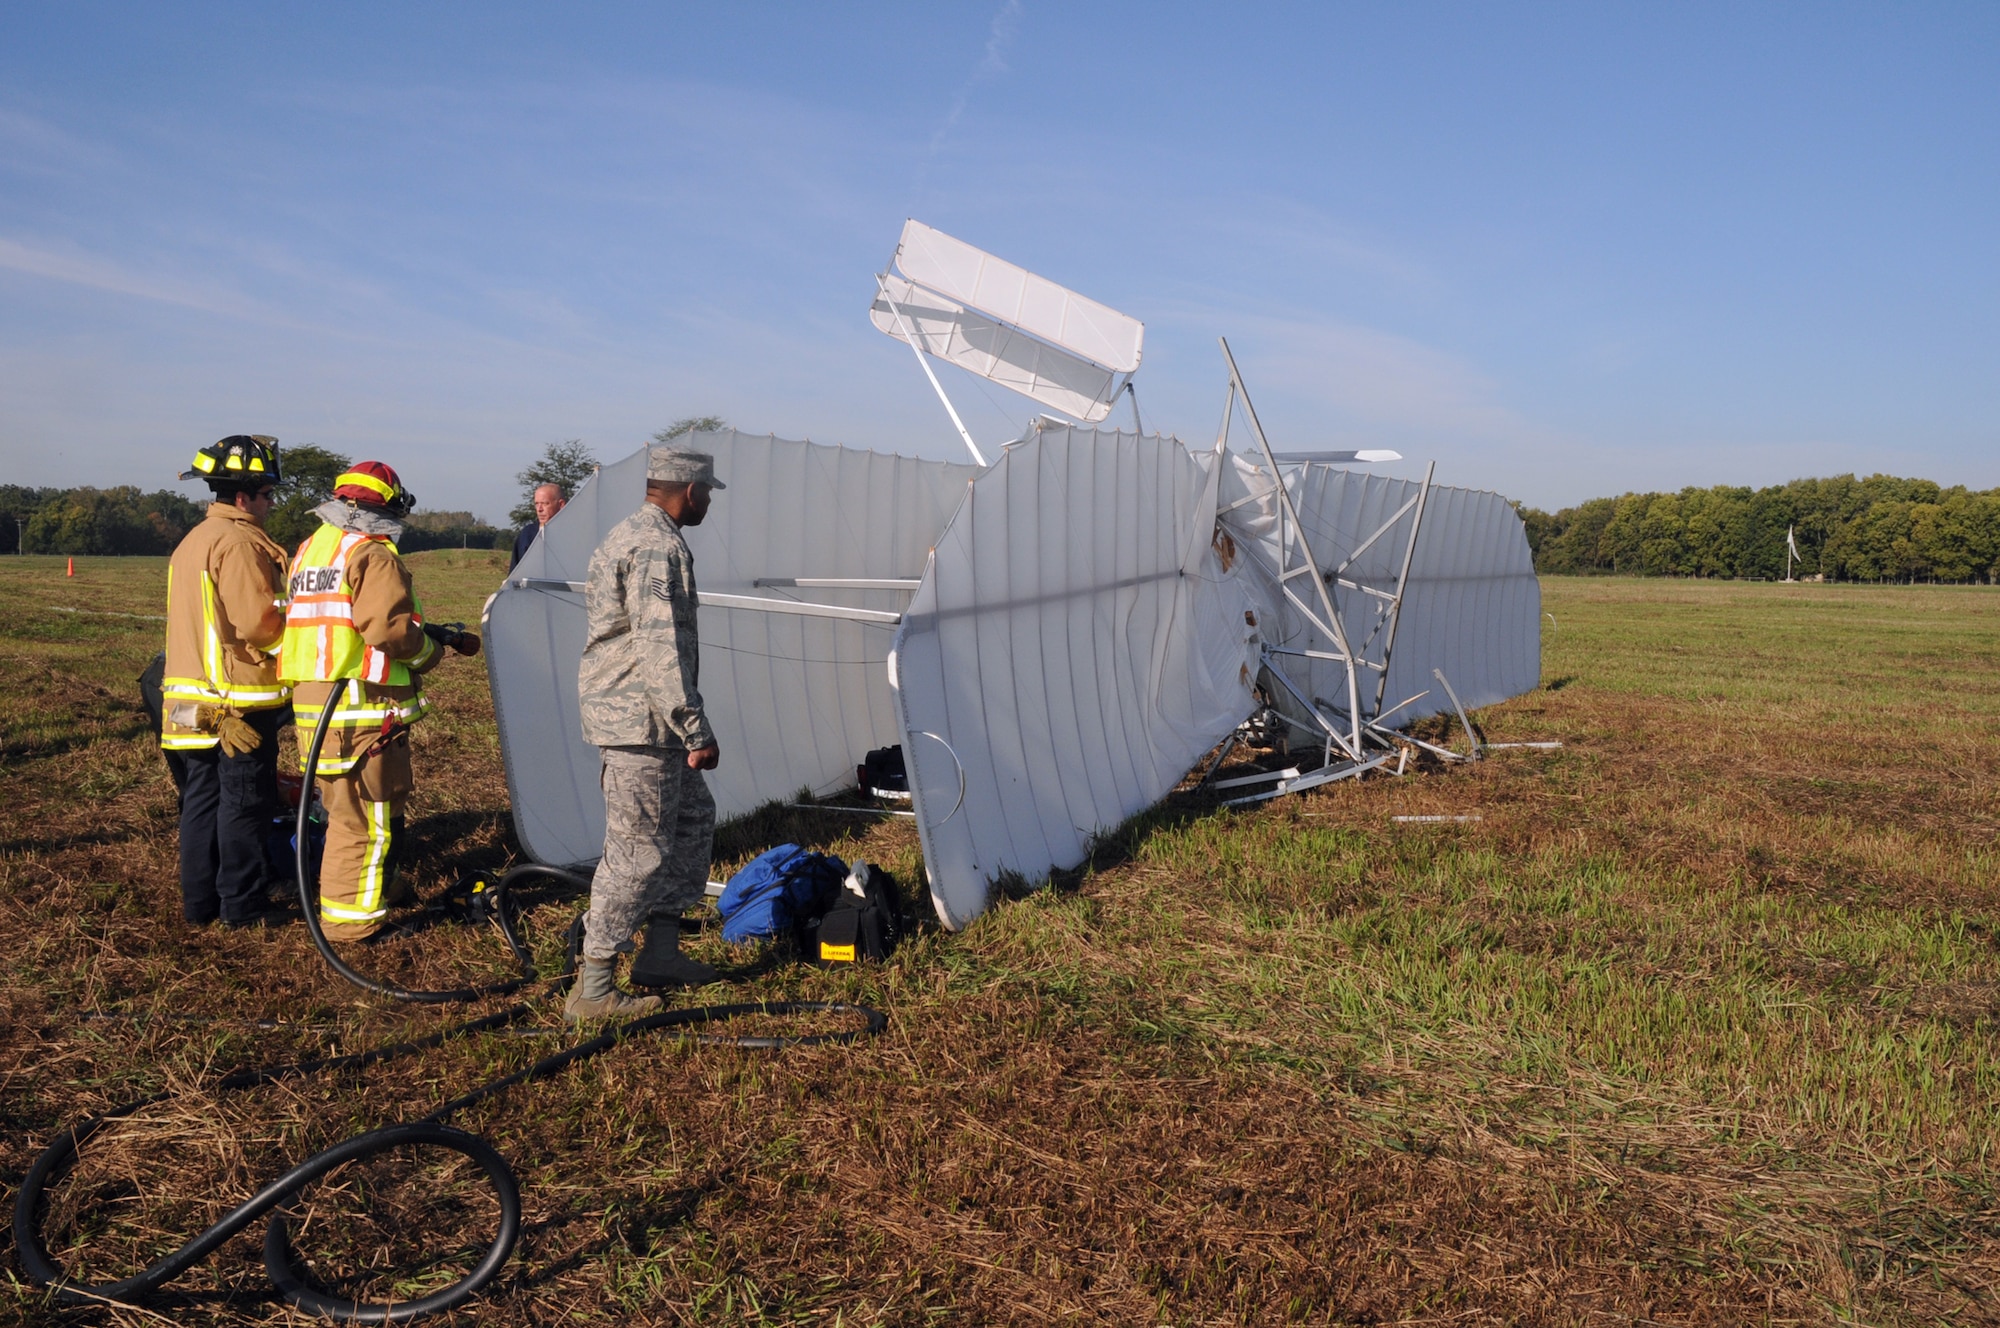 Air Force crash rescue and safety personnel inspect the wreckage of a replica 1905 Wright Flyer III that crashed Oct. 1, 2009 on Huffman Prairie Flying Field at Wright-Patterson Air Force Base, Ohio. Pilot and vintage aircraft builder Mark Dusenberry of Dennison, Ohio, was injured during the practice flight in preparation to celebrate the 104th Anniversary of Practical Flight. (U.S. Air Force photo/Al Bright) 